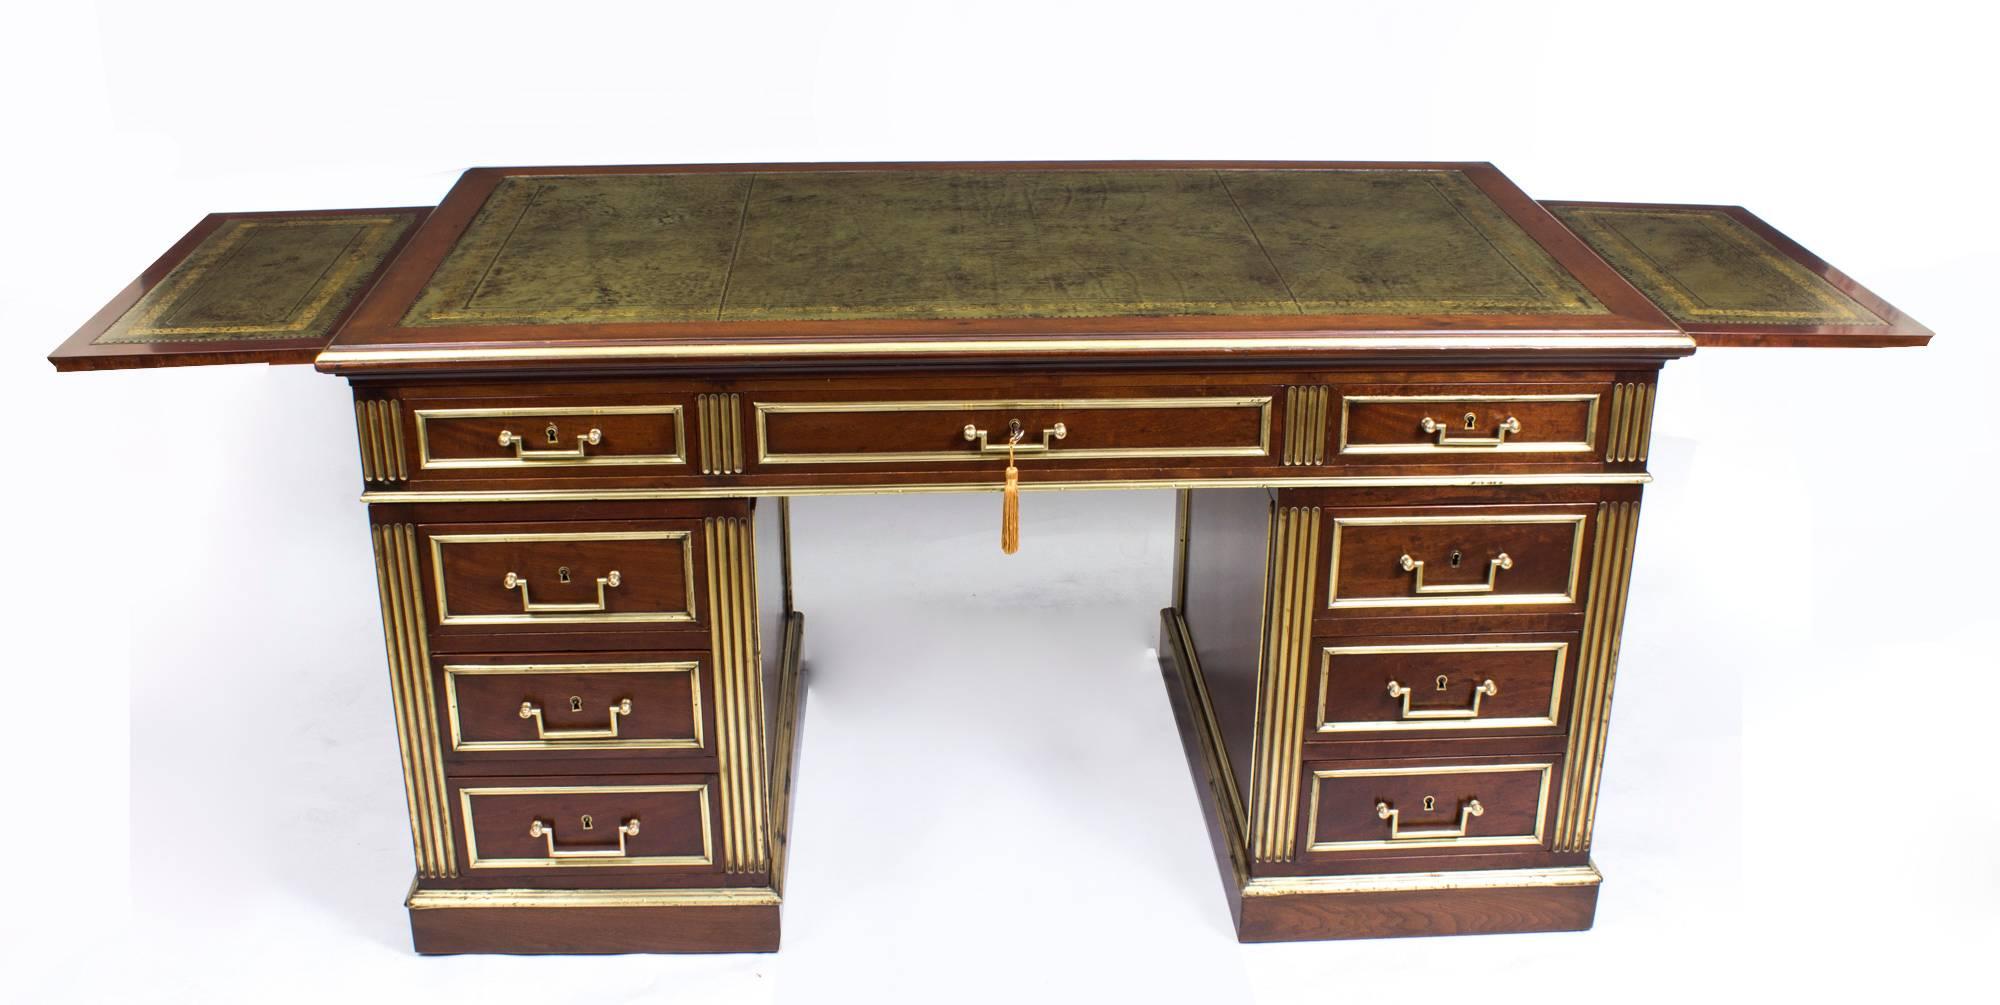 This is a beautiful antique French Empie Revival mahogany pedestal desk with stunning hand-hammered brass decoration, circa 1880 in date.

The rectangular top with an inset green and gold tooled leather writing surface, with three capacious frieze